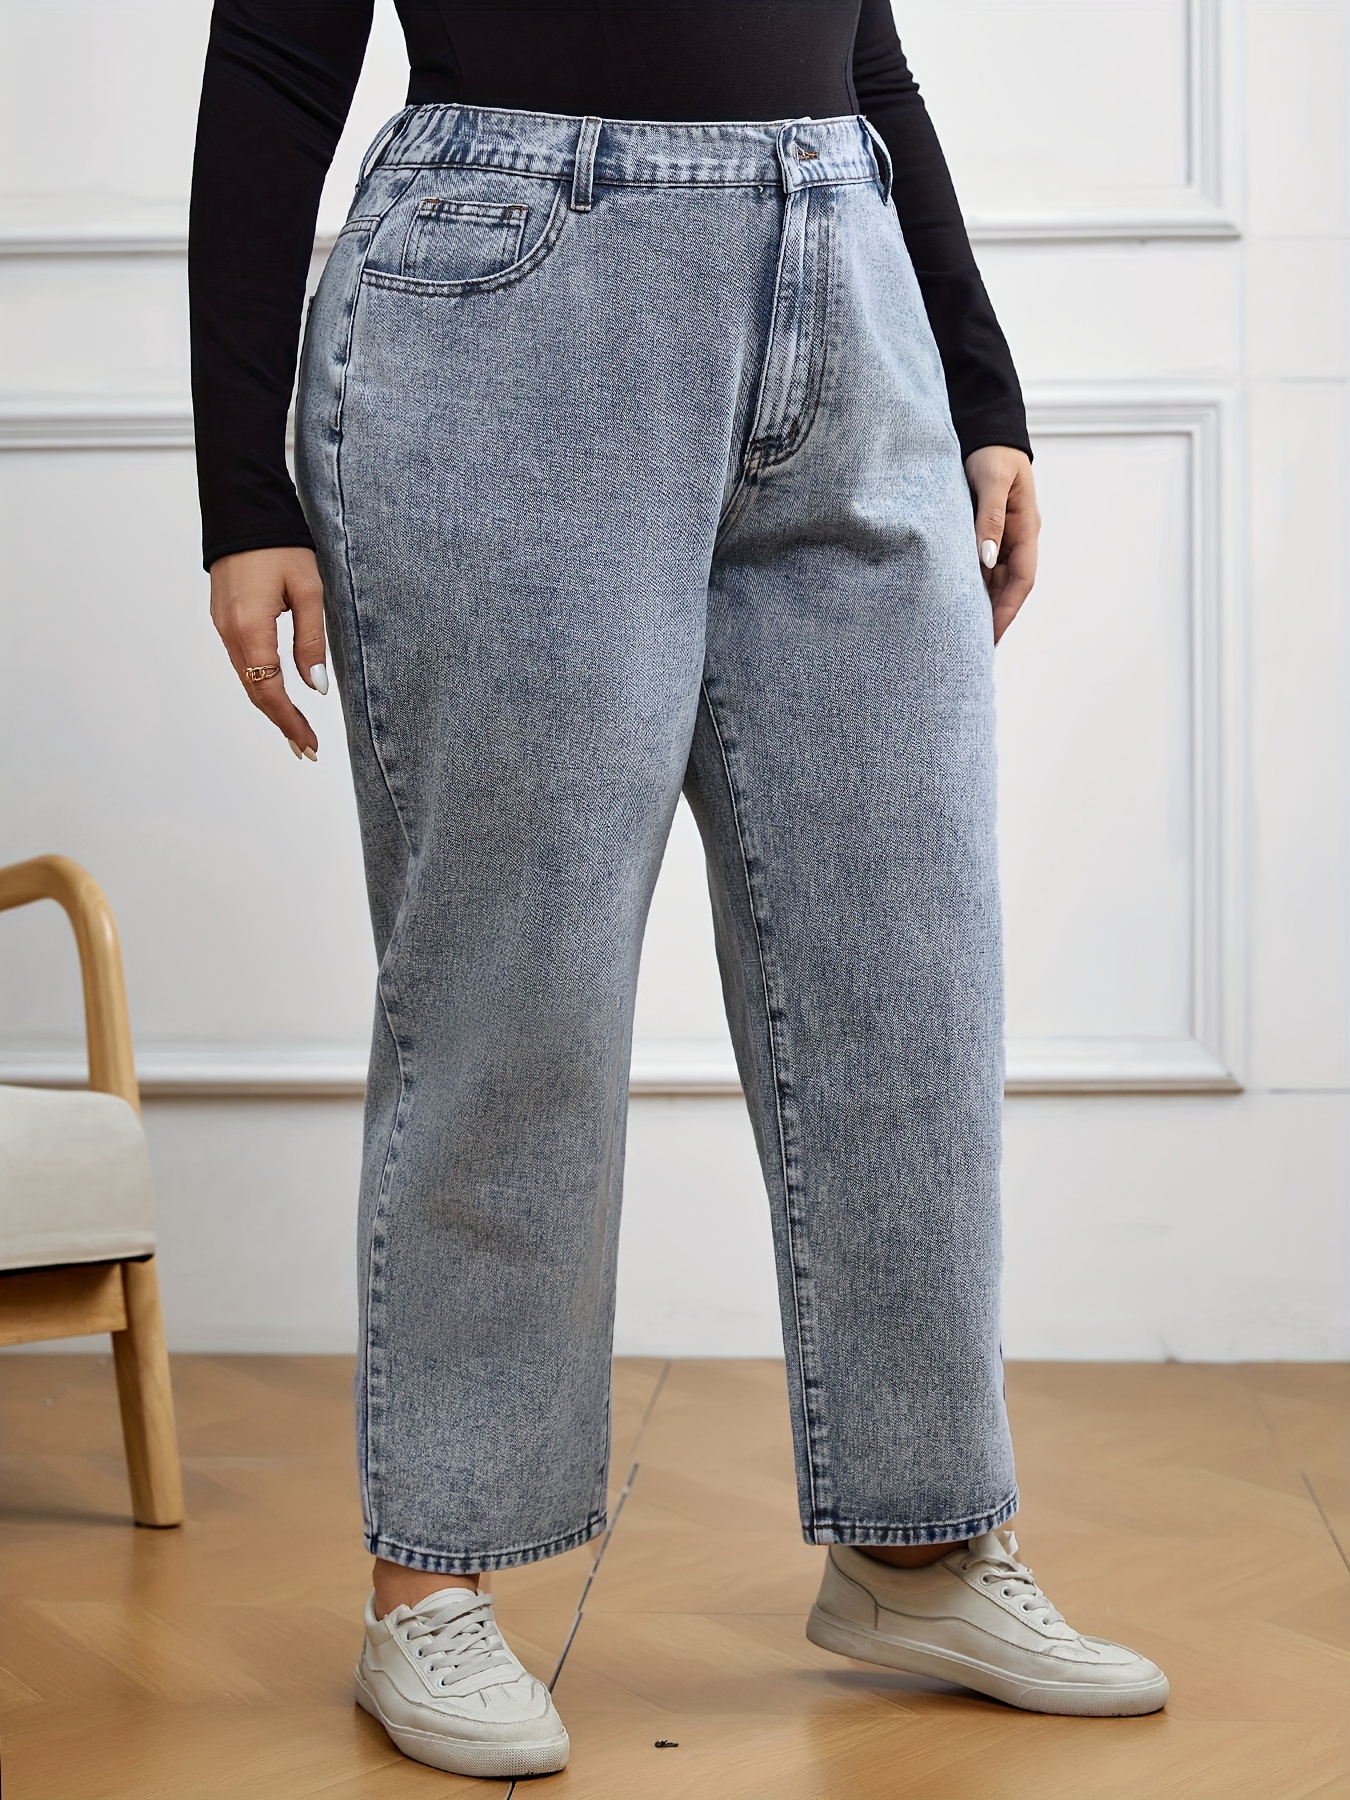 Plus Size Casual Jeans, Women's Plus Washed Button Fly High Stretch  Straight Leg Jeans With Flap Pockets